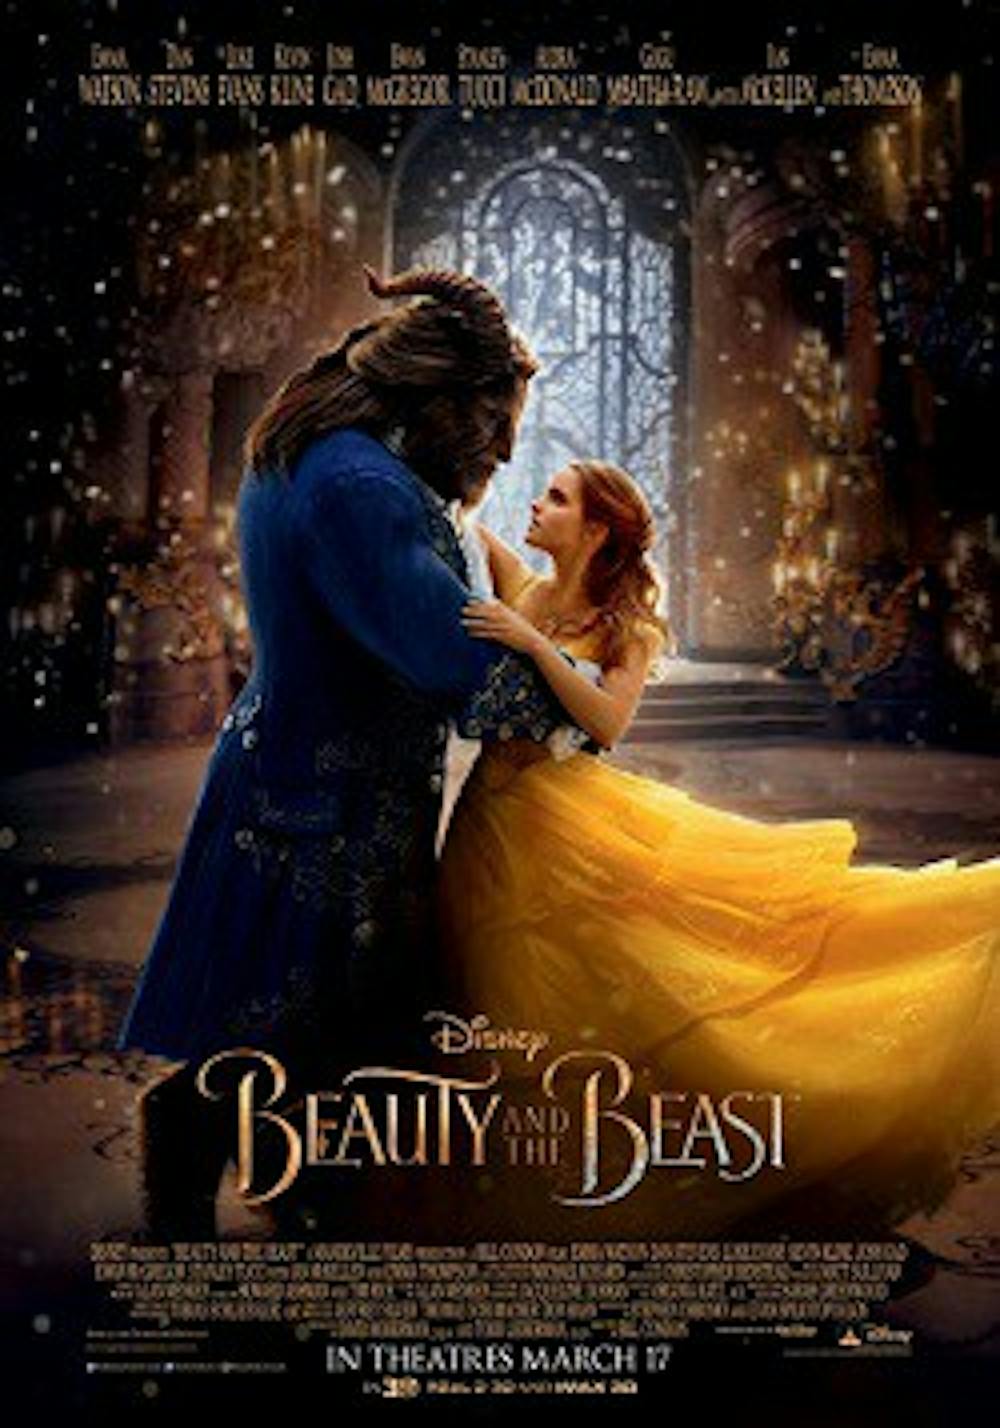 <p>The reboot of&nbsp;"Beauty and the Beast" puts a modern spin on the classic tale.</p>